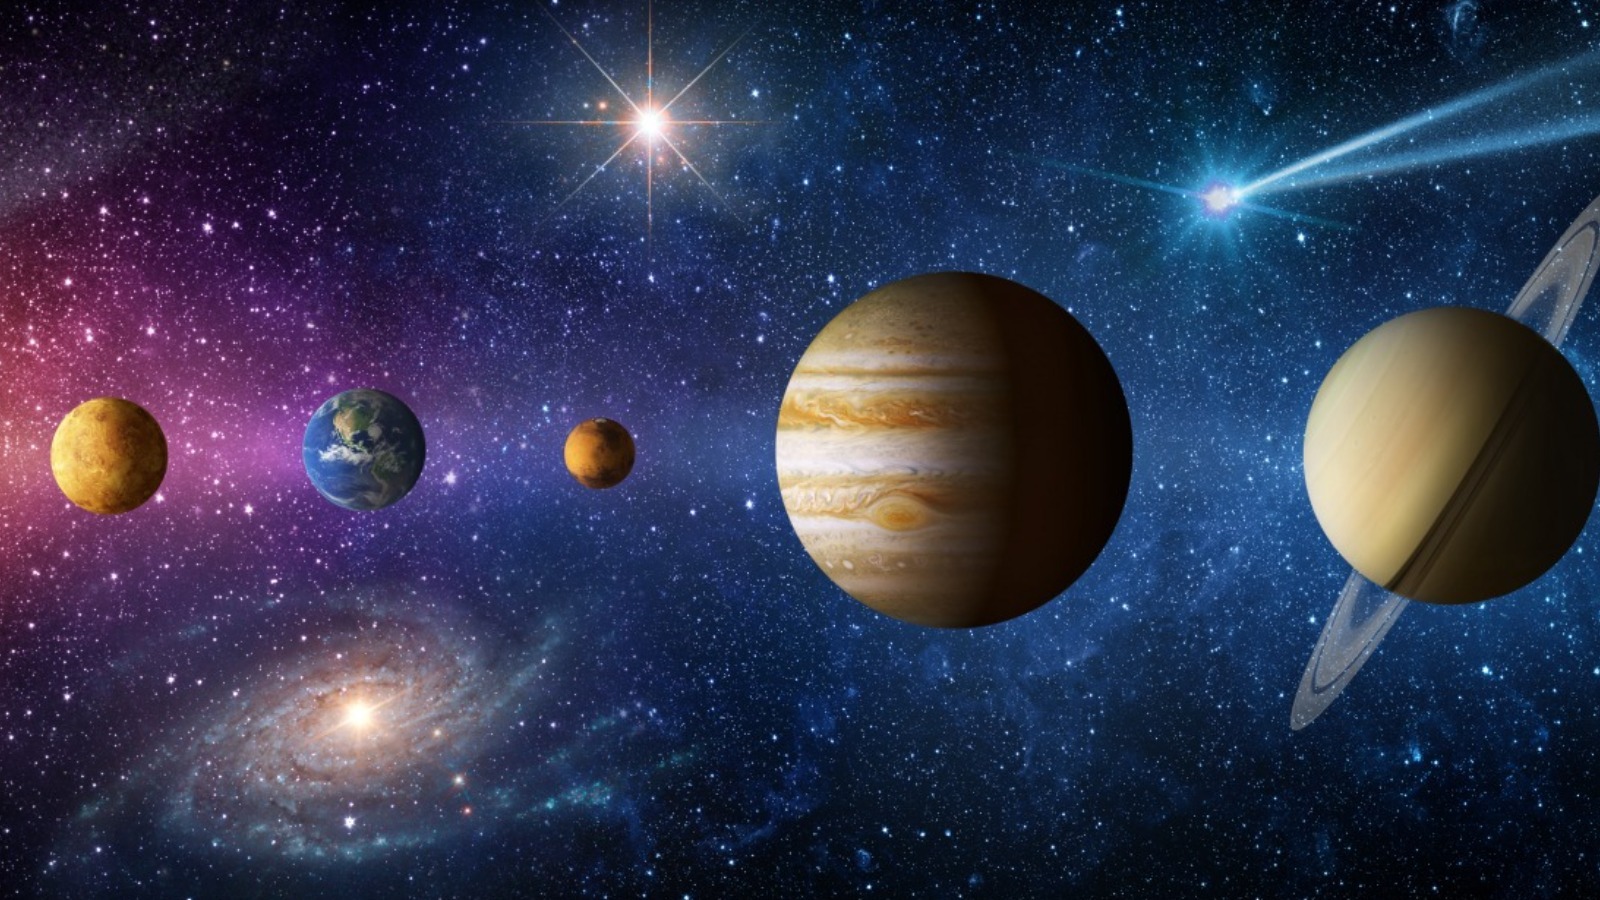 How Old Is Our Solar System?